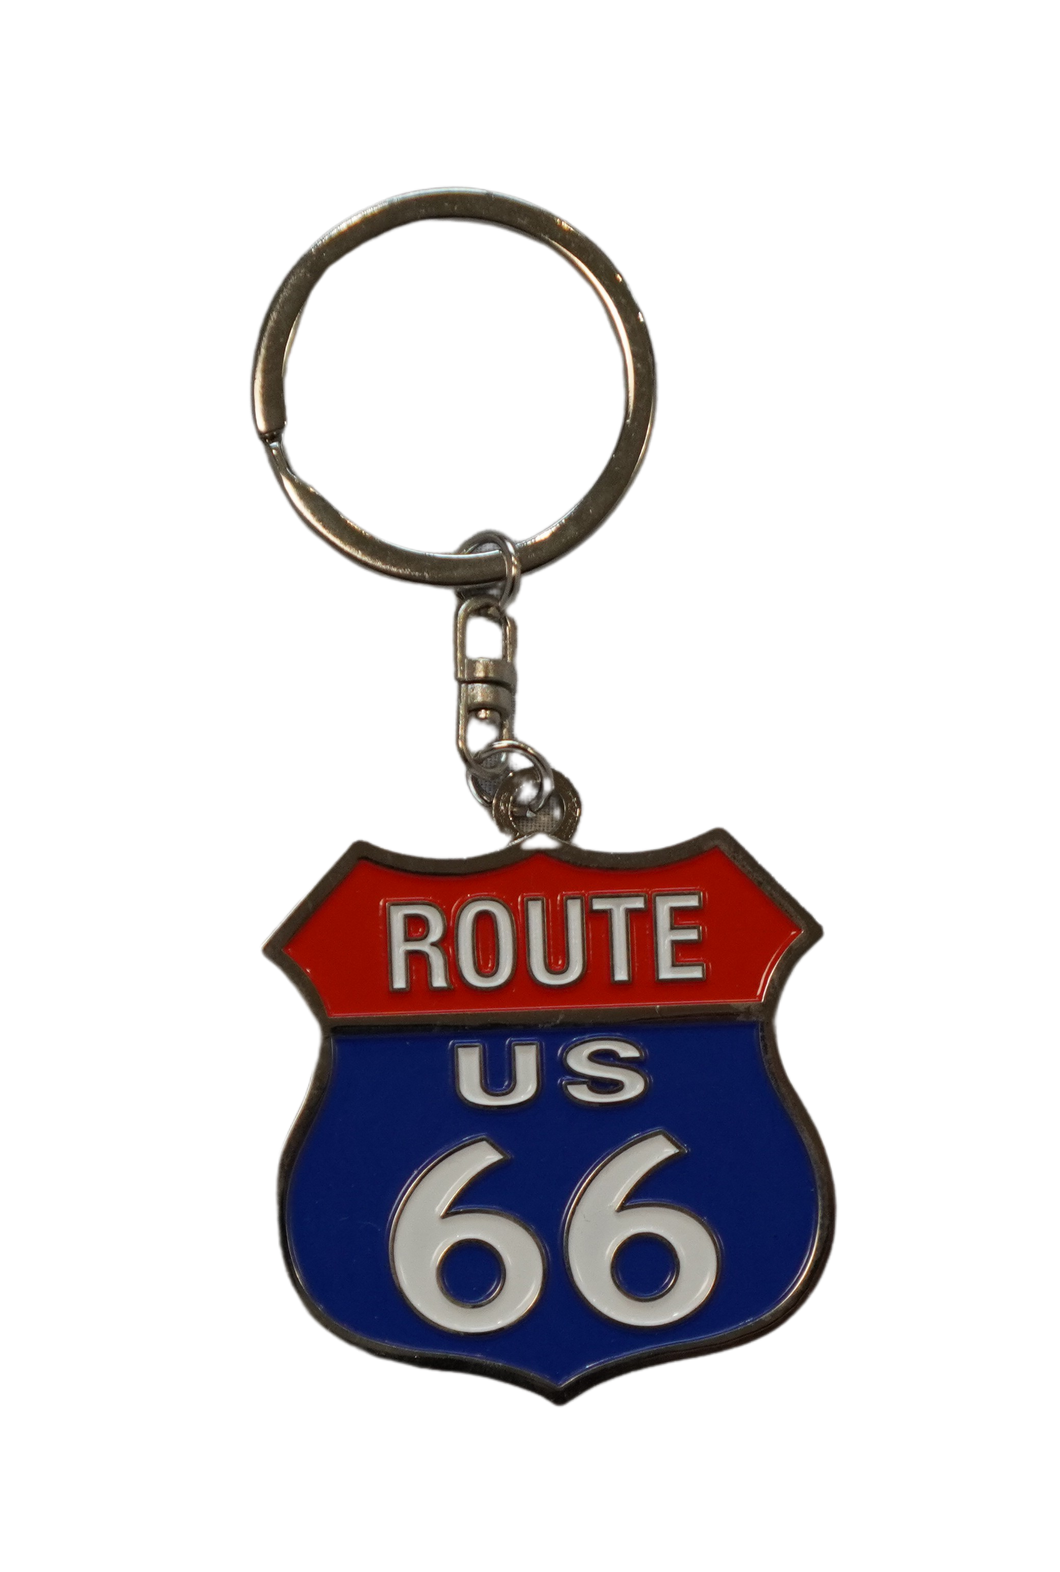 Mother Road Rt 66 Shield Keychain